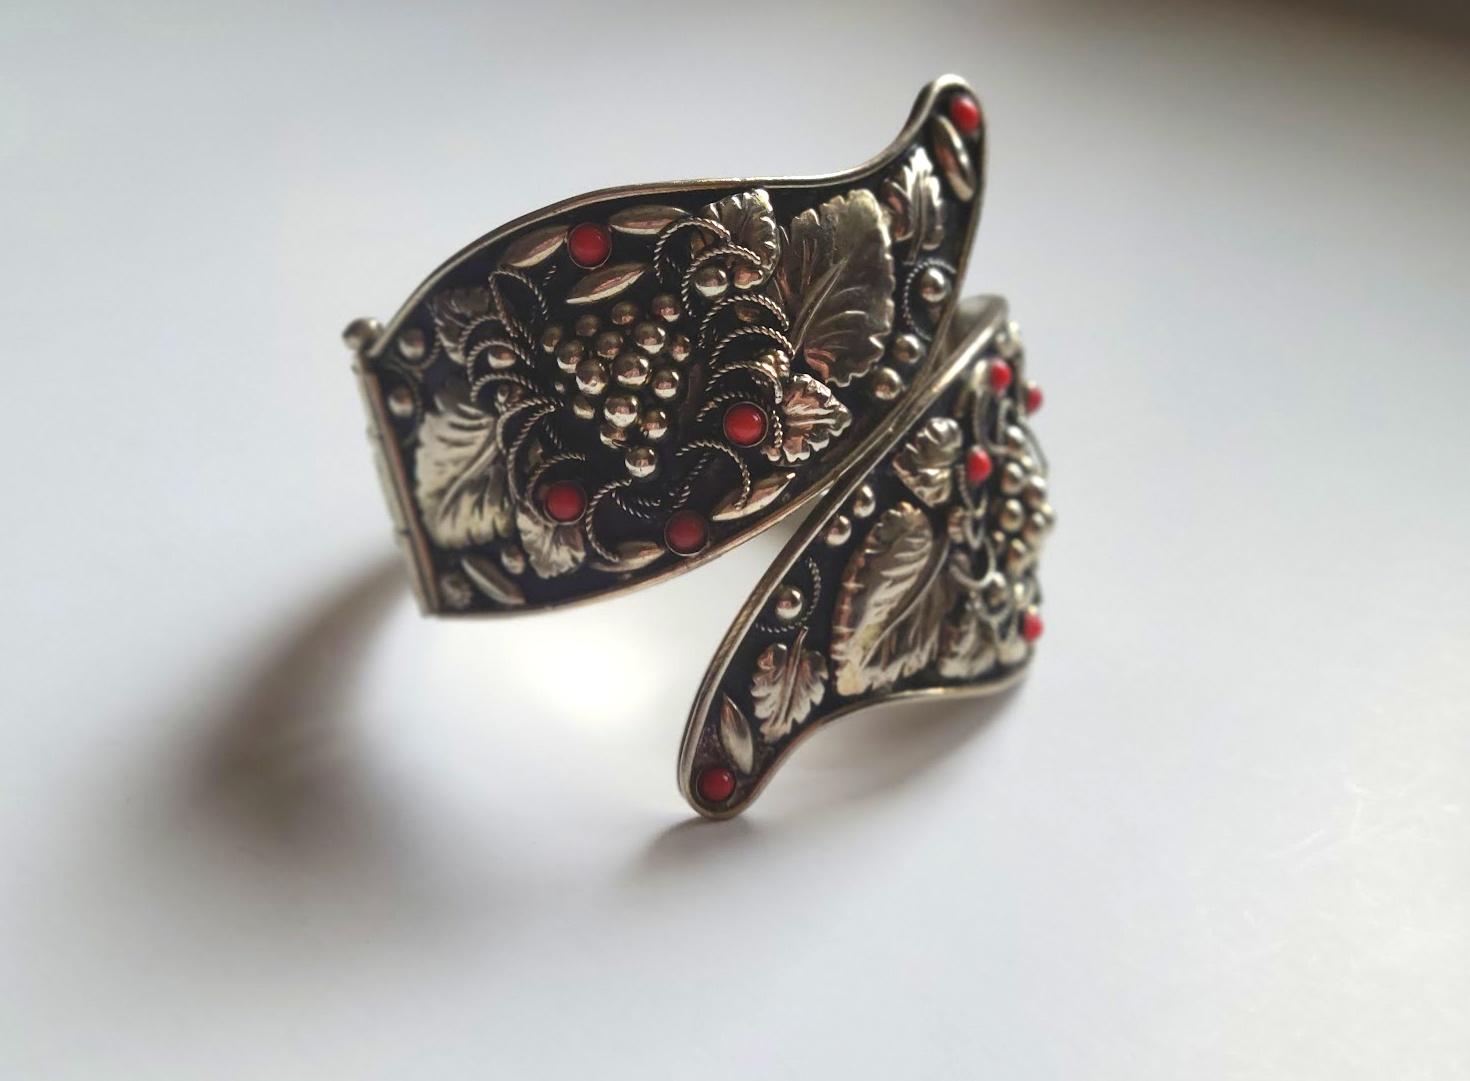 Introducing a breathtaking vintage Italian cuff bracelet with an Etruscan style that is estimated to be from the 1940s-1960s era. With approximately 6 3/4